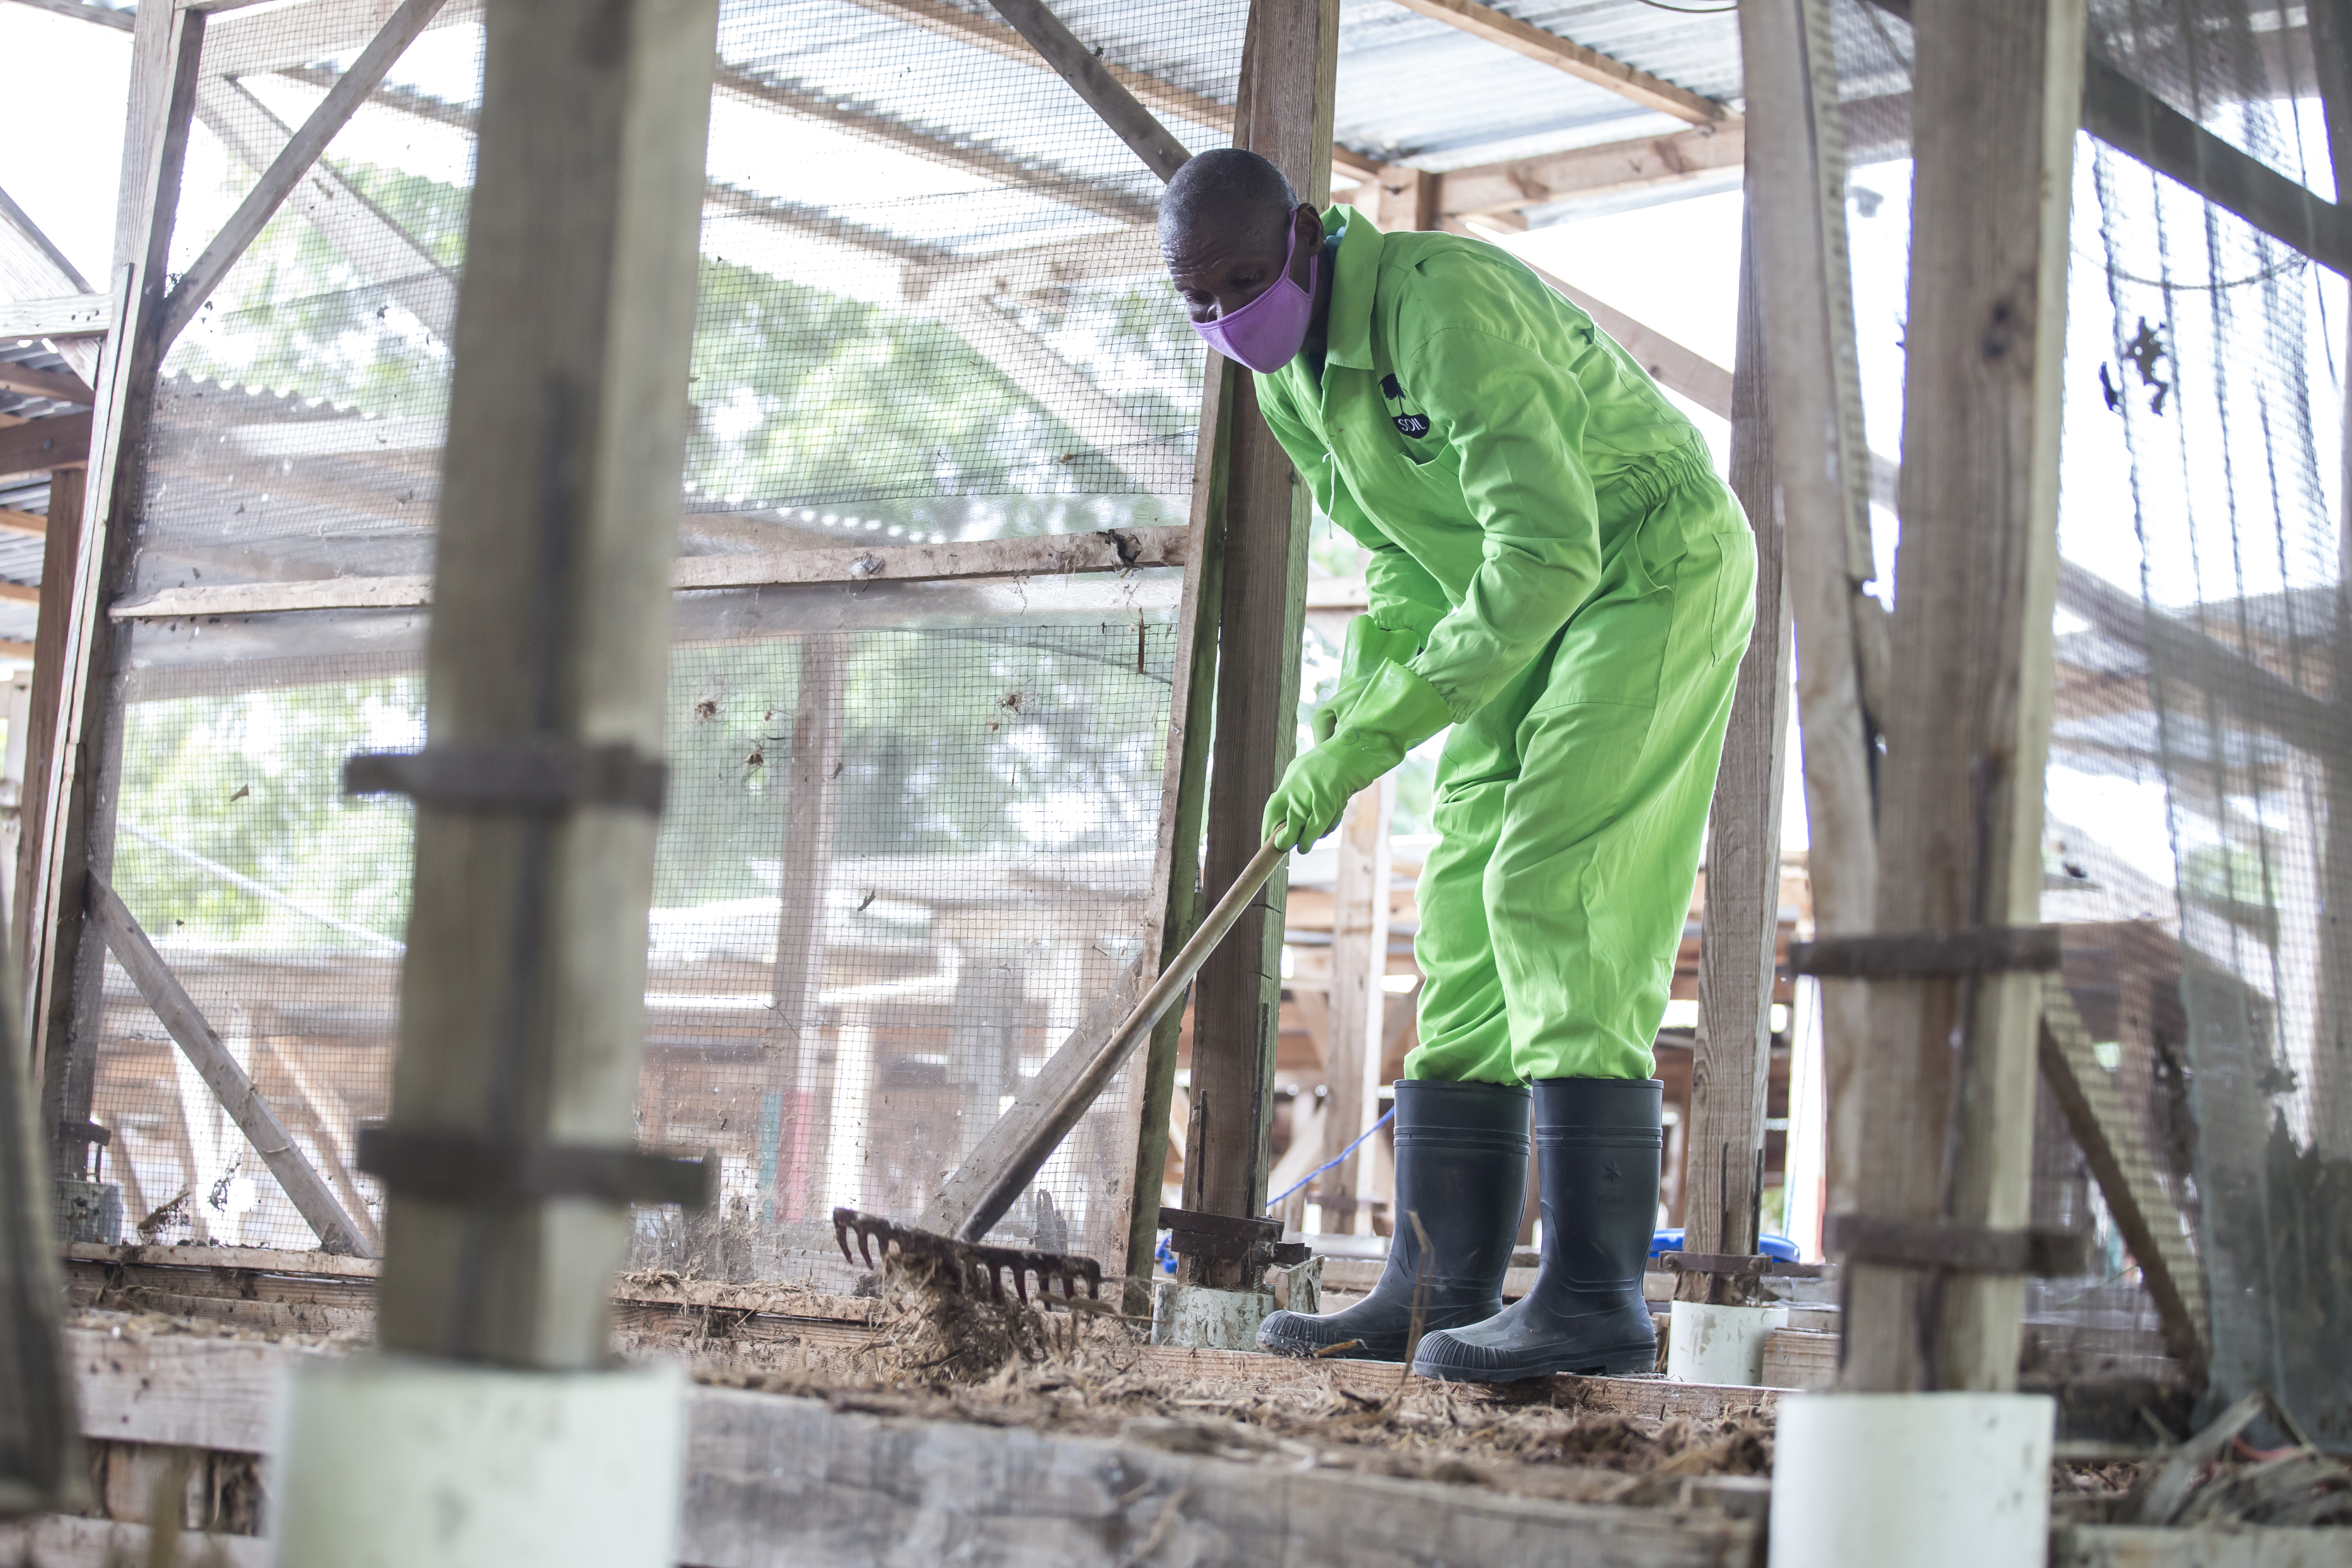 Wearing protective gear, a worker at the composting facility rakes cover material over a newly filled compost bin. Photo: Caleb Alcenat/Labelimage for Project #WasteNot (Creative Commons).